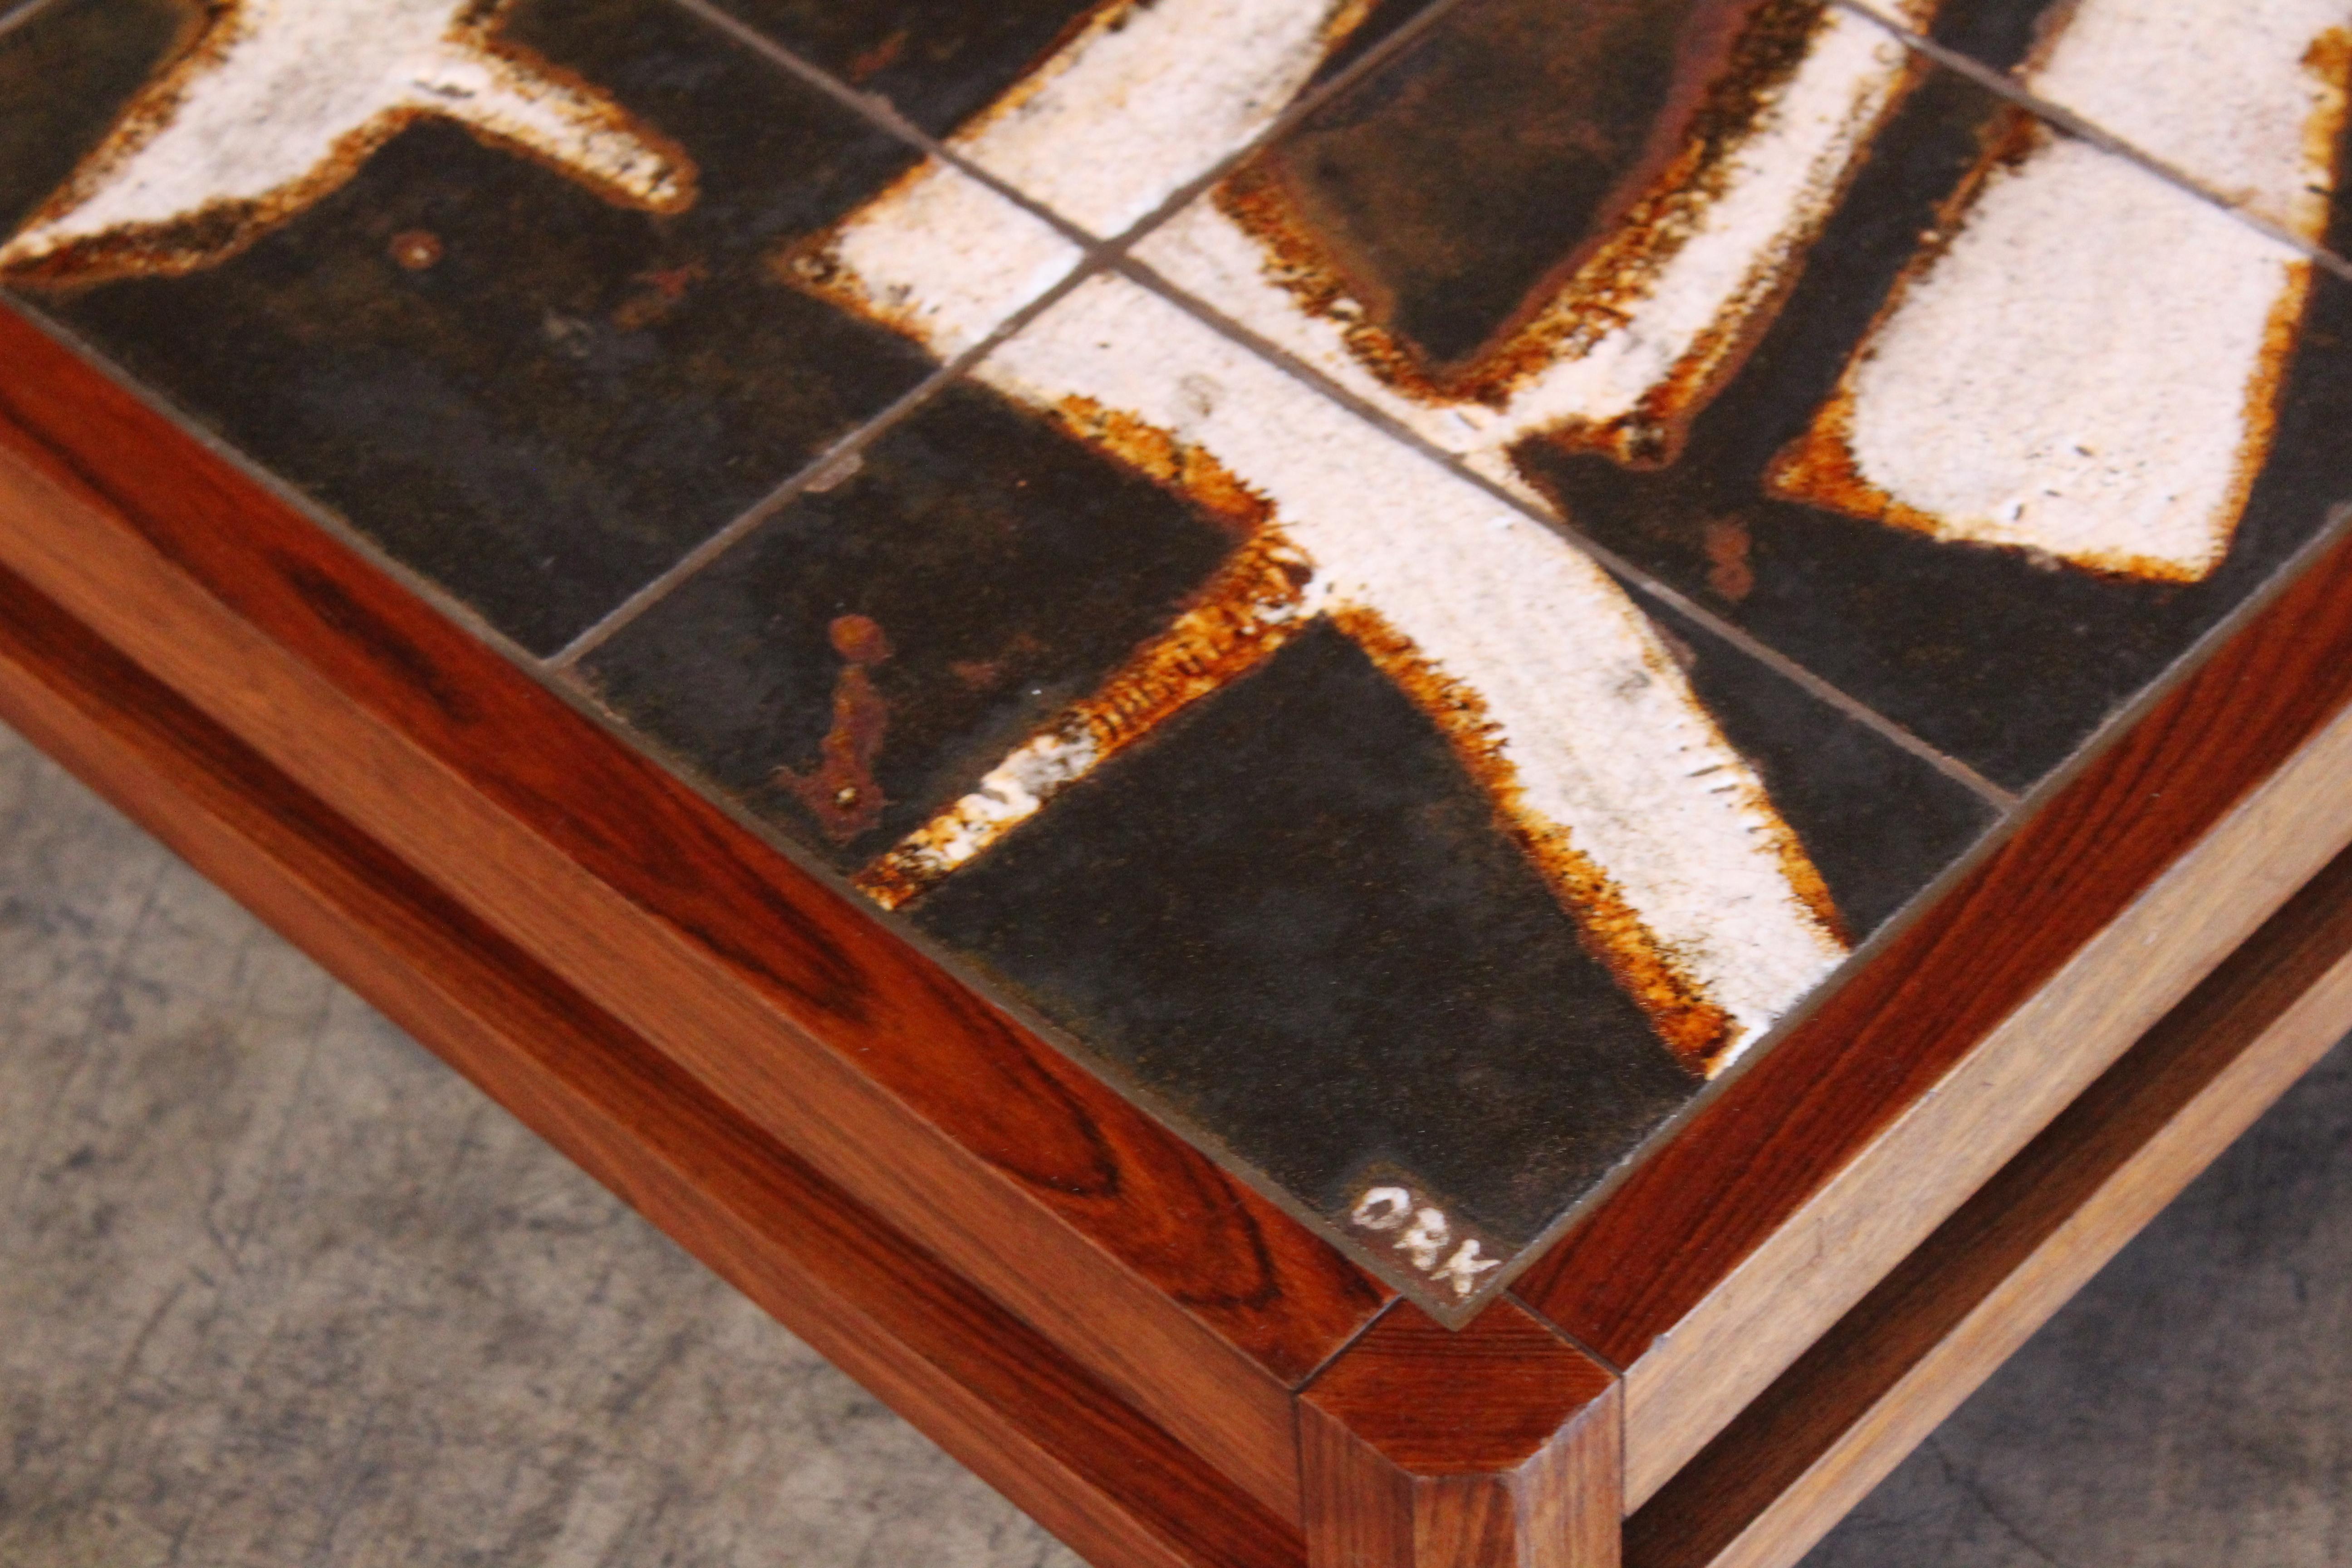 Danish Rosewood and Ceramic Tile Coffee Table by Ole Bjorn Krüger, 1960s For Sale 2